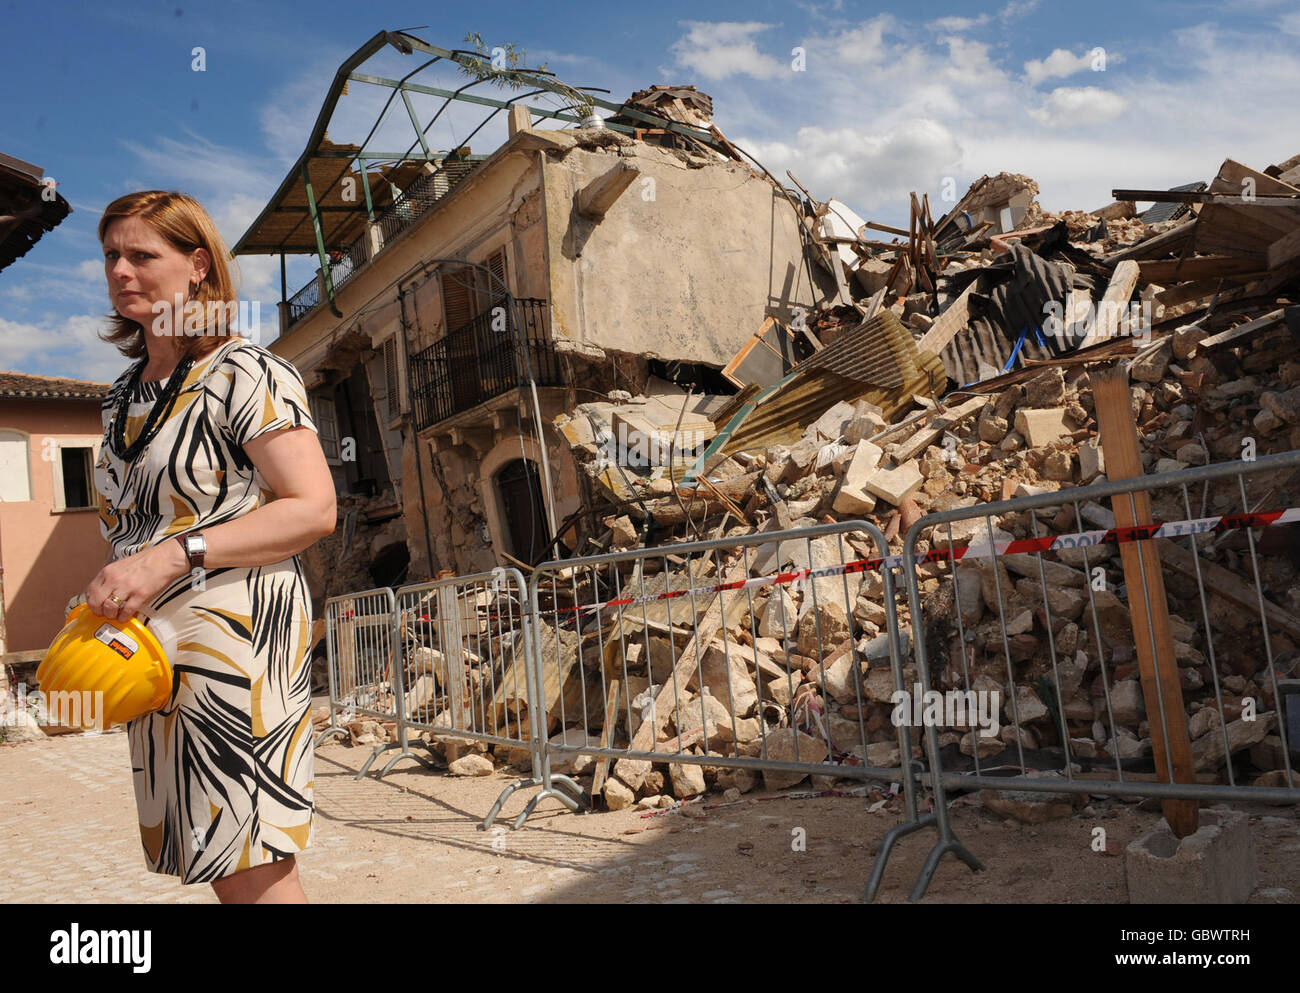 Sarah Brown visits the ruined village of Onna near L'Aquila, Italy which was at the epicentre of the earthquake which struck the region on April 6, 2009. Stock Photo